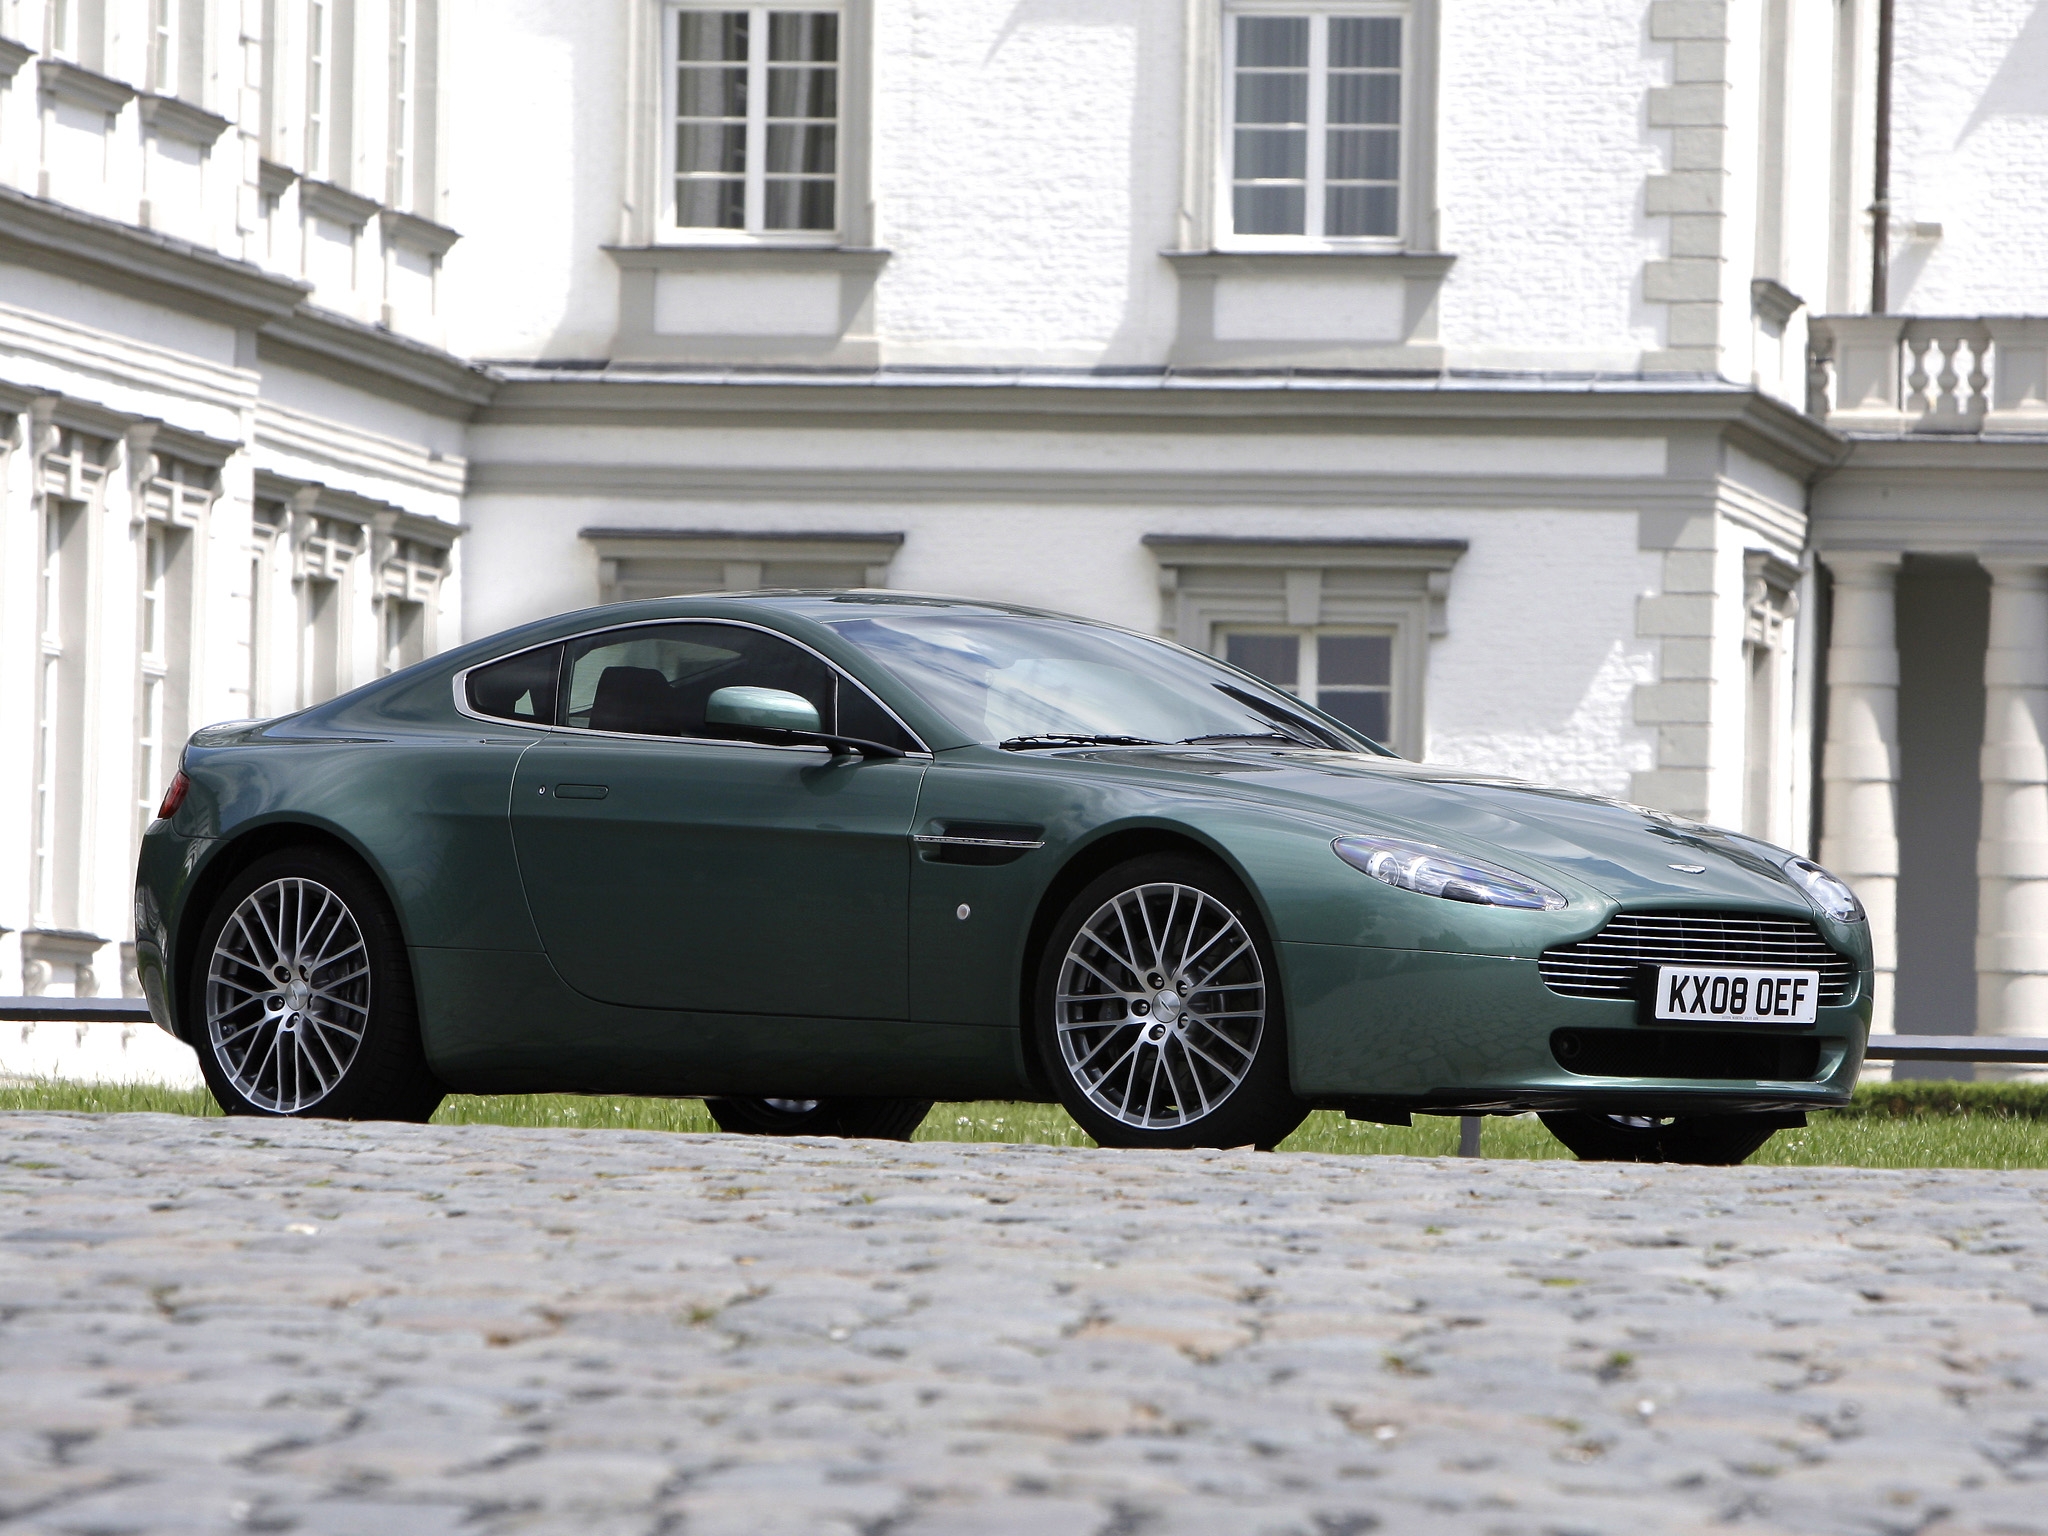 cars, aston martin, green, building, side view, style, 2008, v8, vantage Full HD